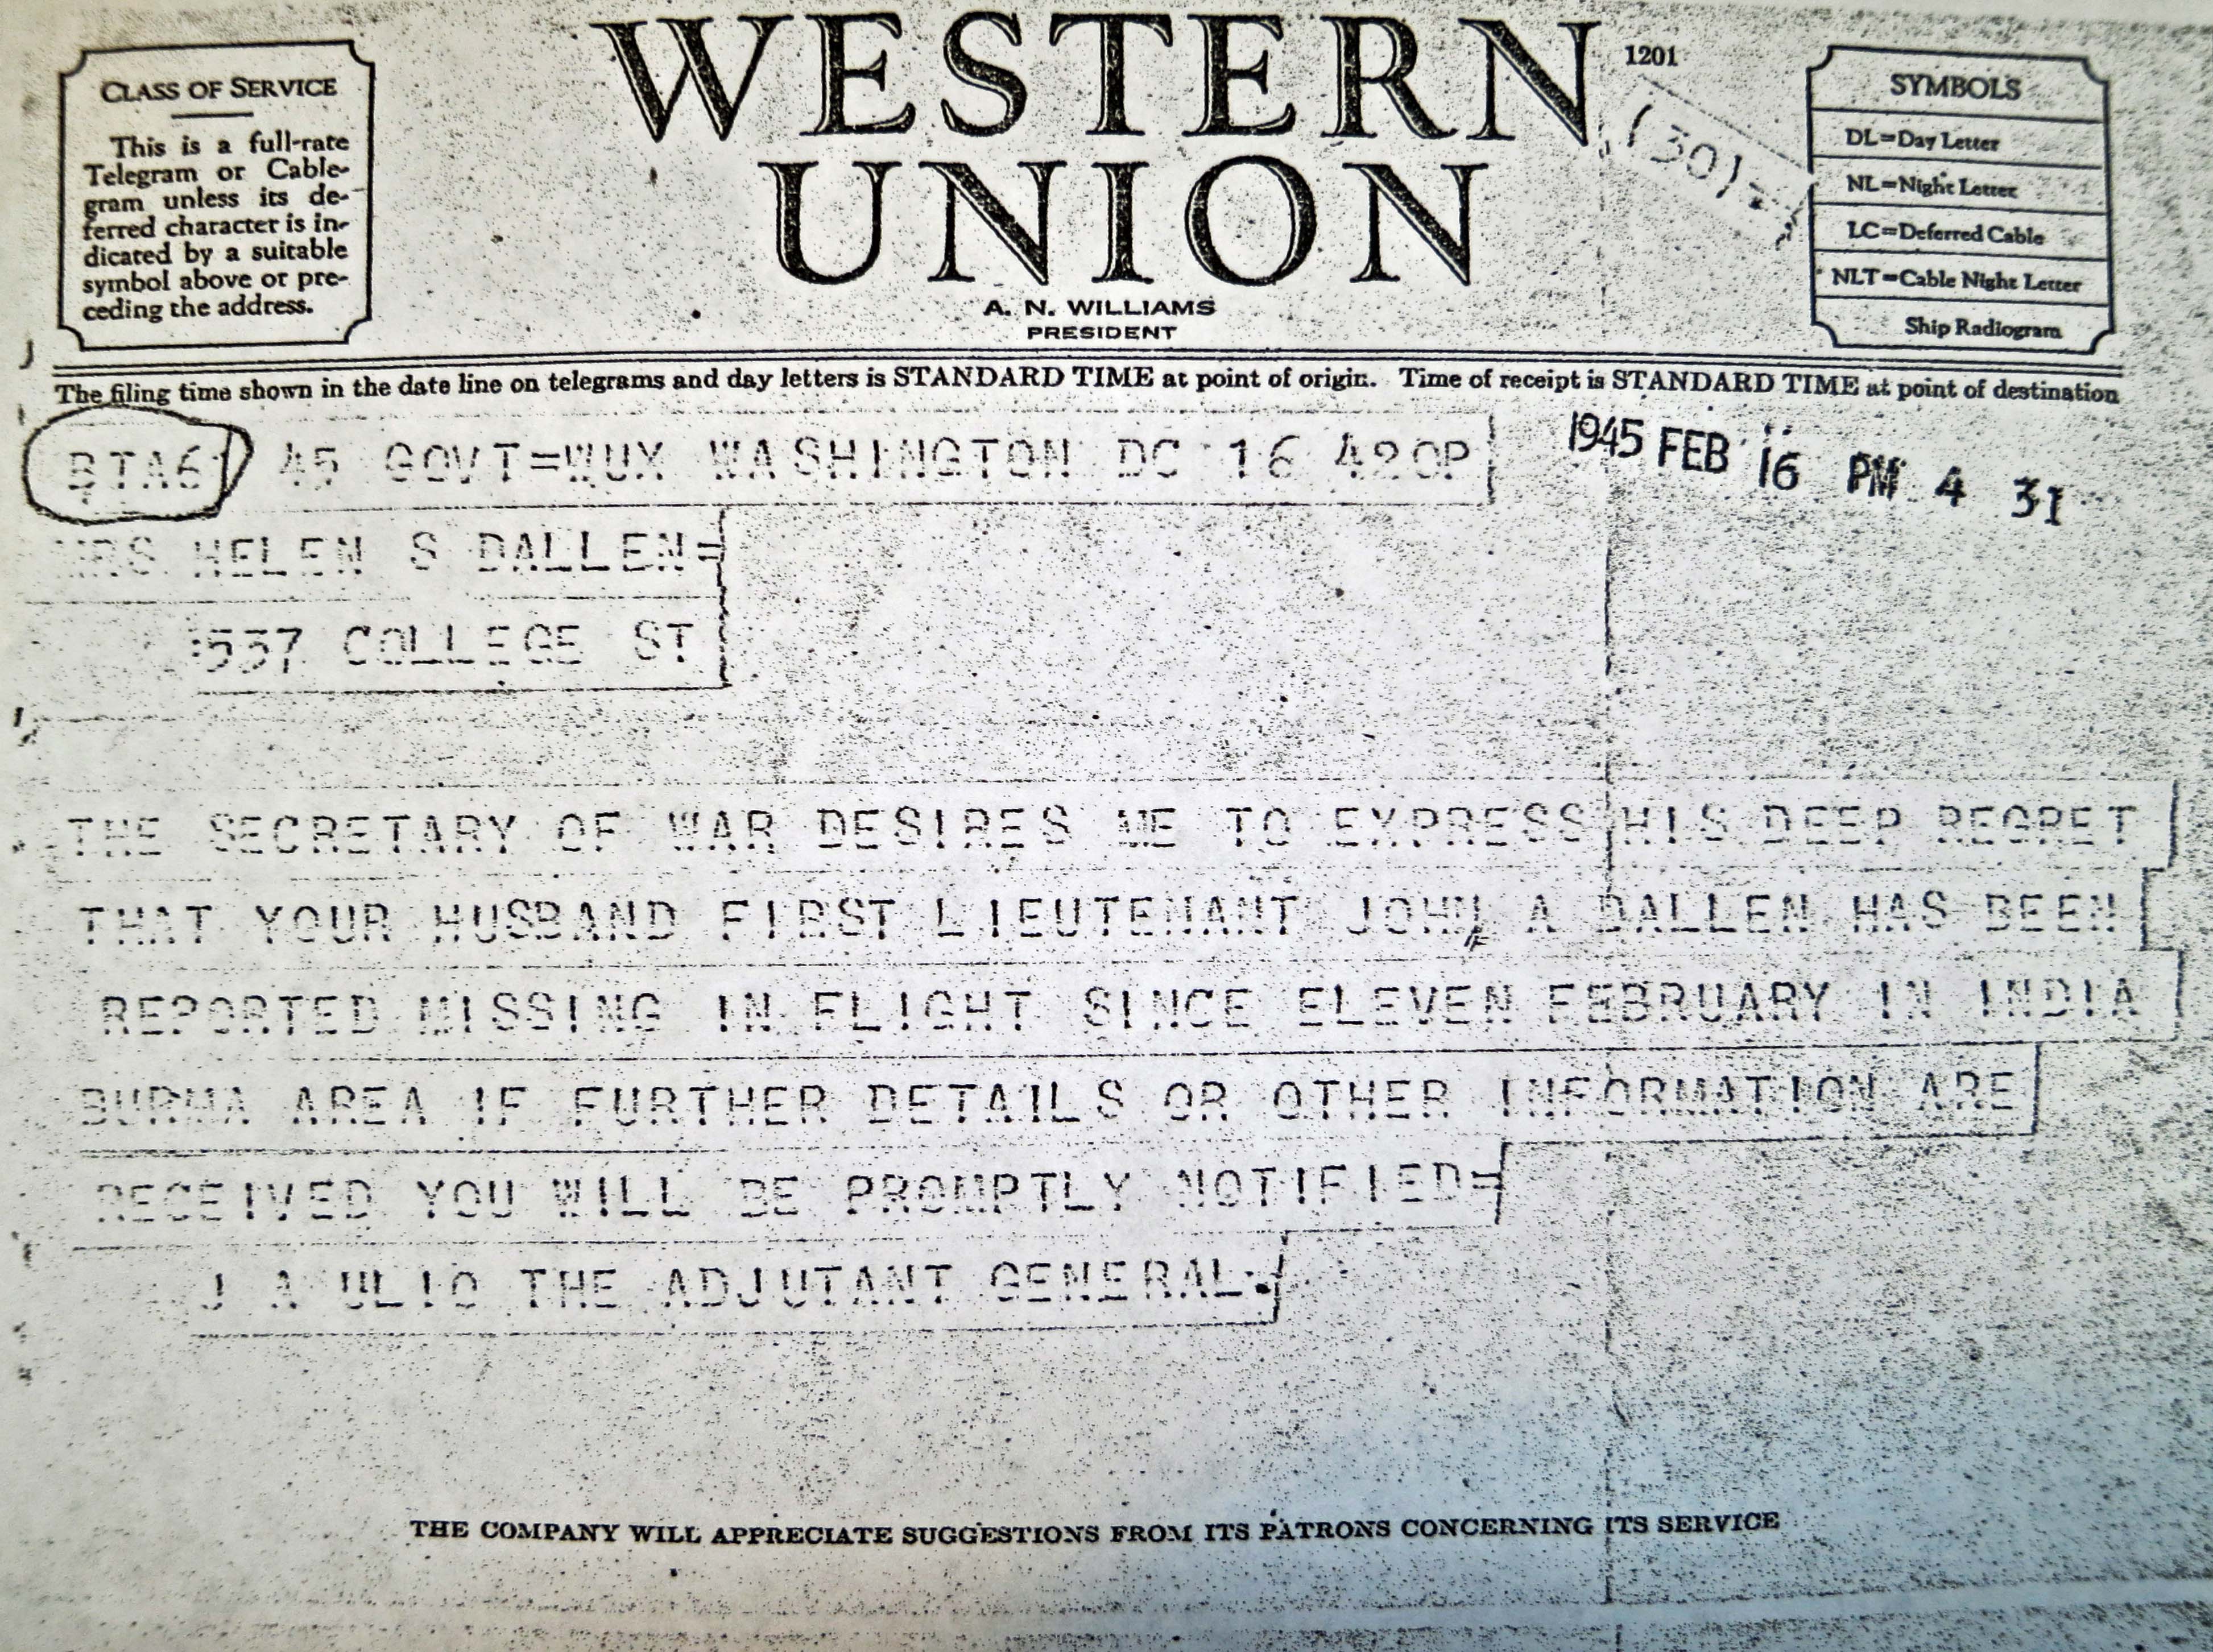 World War II telegram to Helen Dallen informing her that her husband, John Dallen, is missing in action while flying over the Hump (Himalaya Mountains).